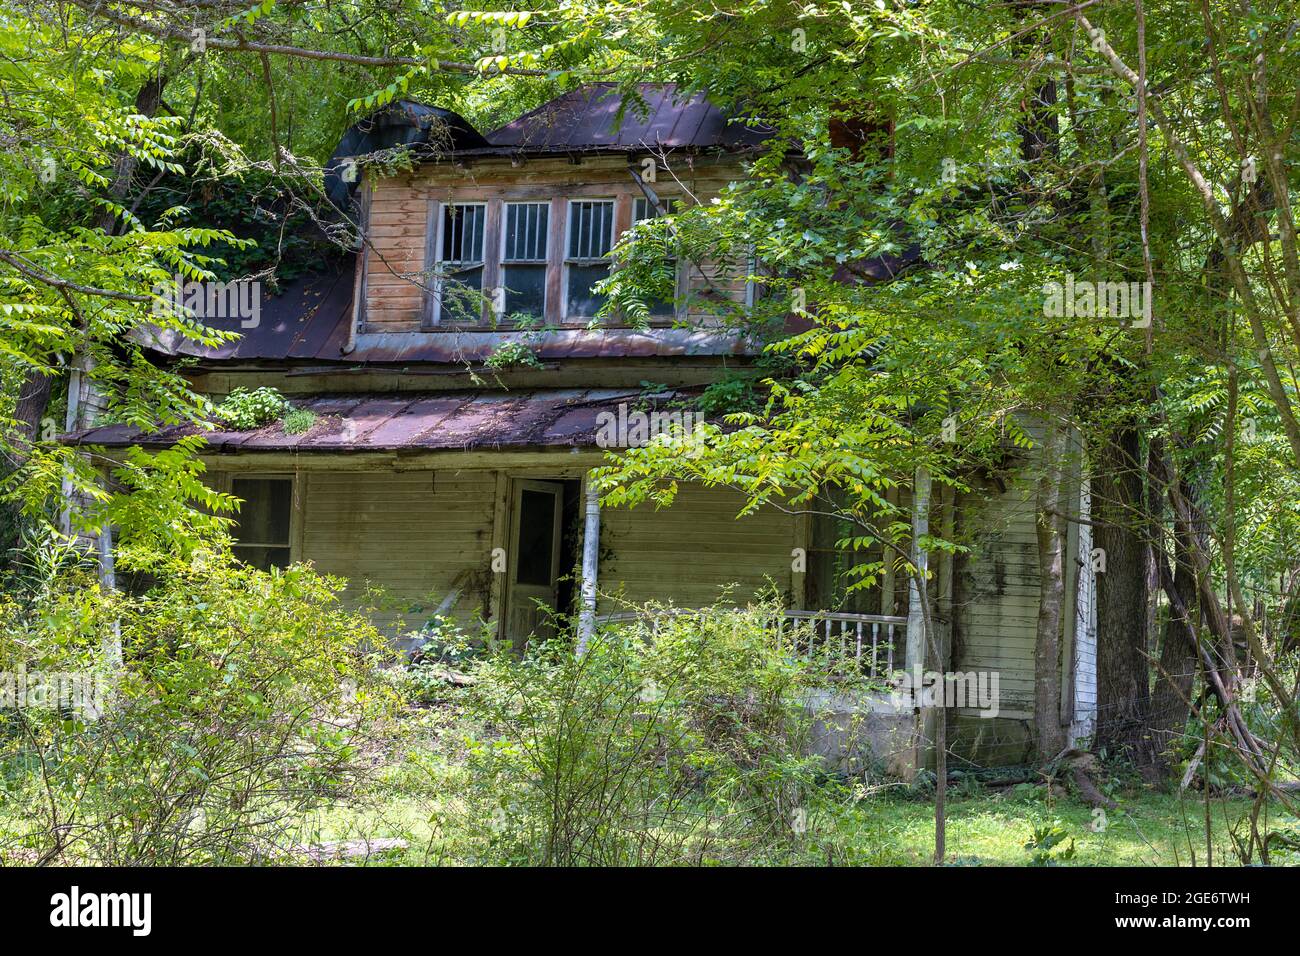 In rural Tennessee, one of many abandoned decaying farmhouses. Stock Photo